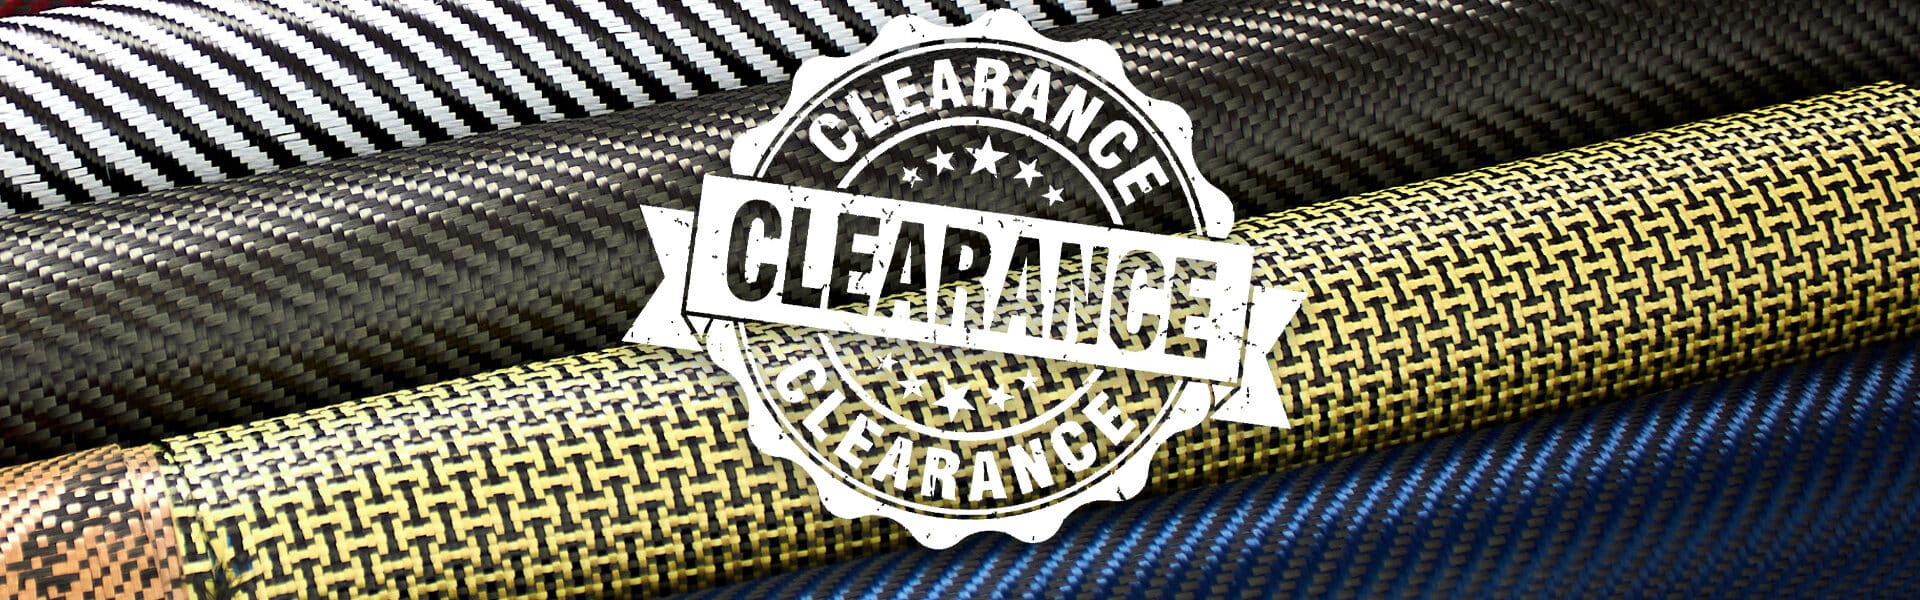 New Clearance Section Now Open